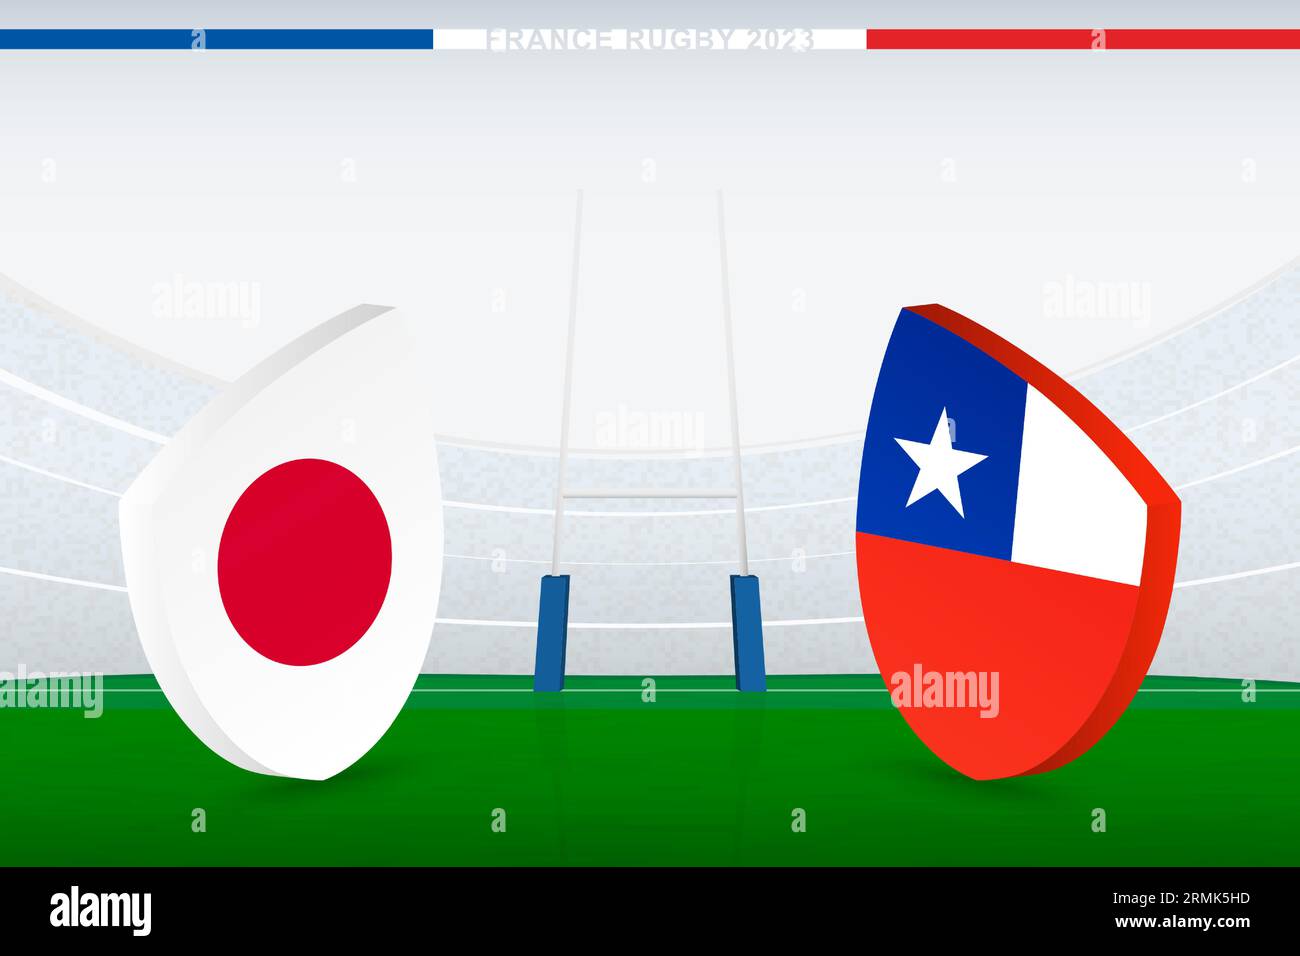 Match between Japan and Chile, illustration of rugby flag icon on rugby stadium. Vector illustration. Stock Vector